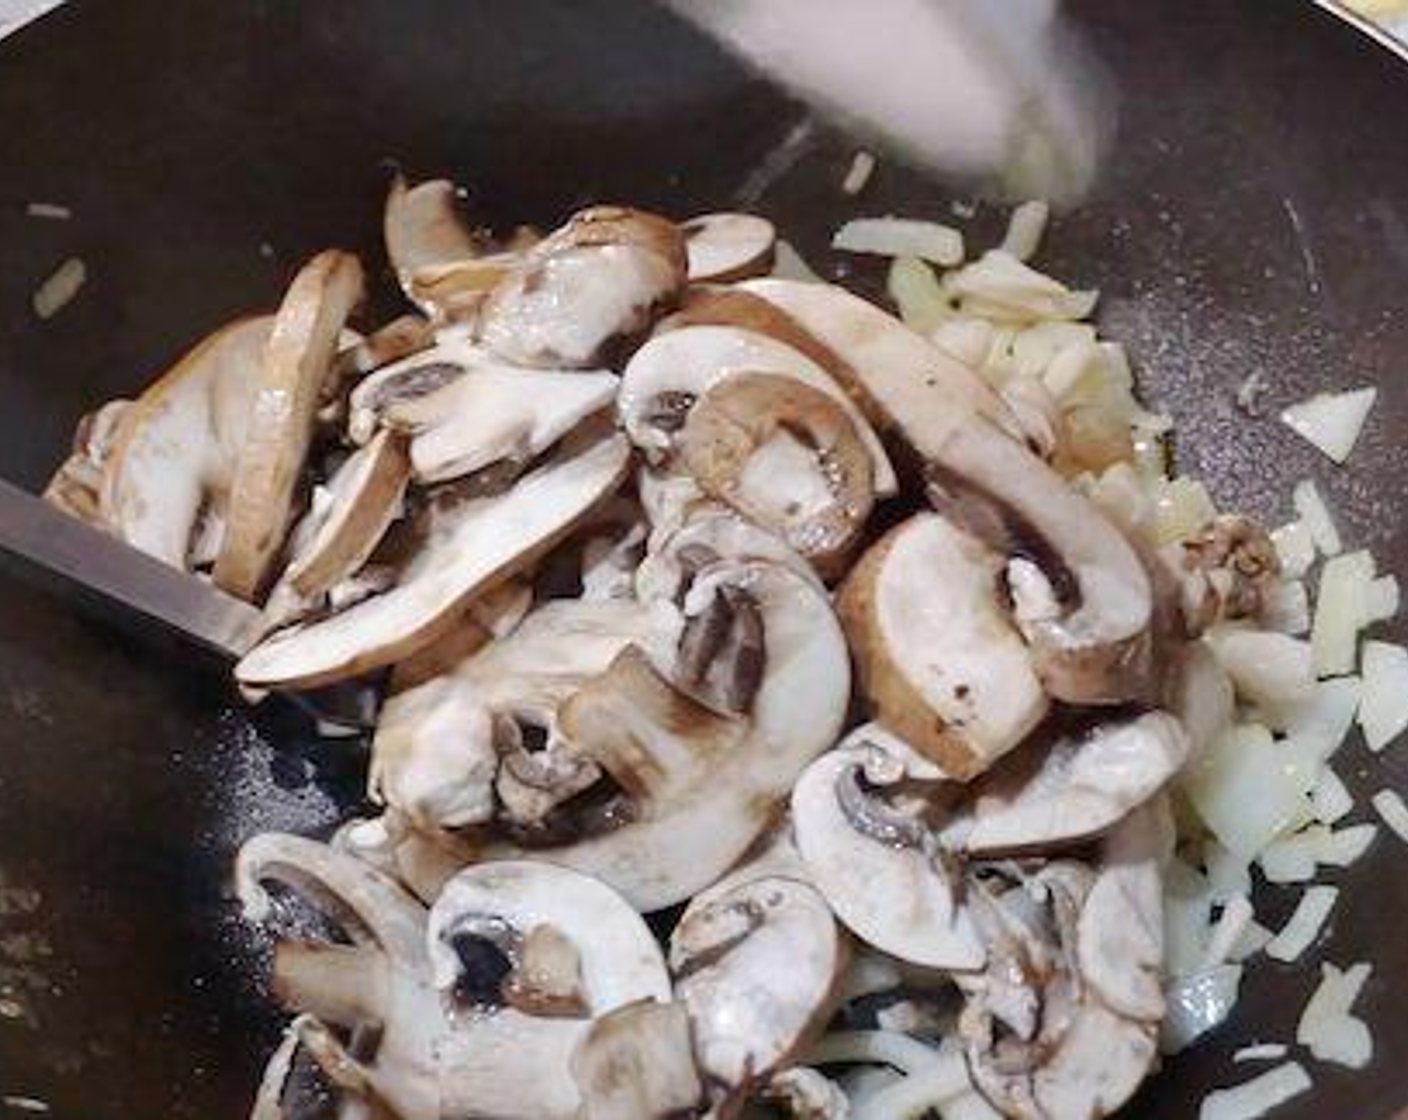 step 5 Add the Brown Mushrooms (3 1/3 cups) and Beech Mushrooms (2 2/3 cups). Season with Salt (to taste) and Ground Black Pepper (to taste). Continue stir-frying till most of the water from mushrooms has evaporated. Set aside.